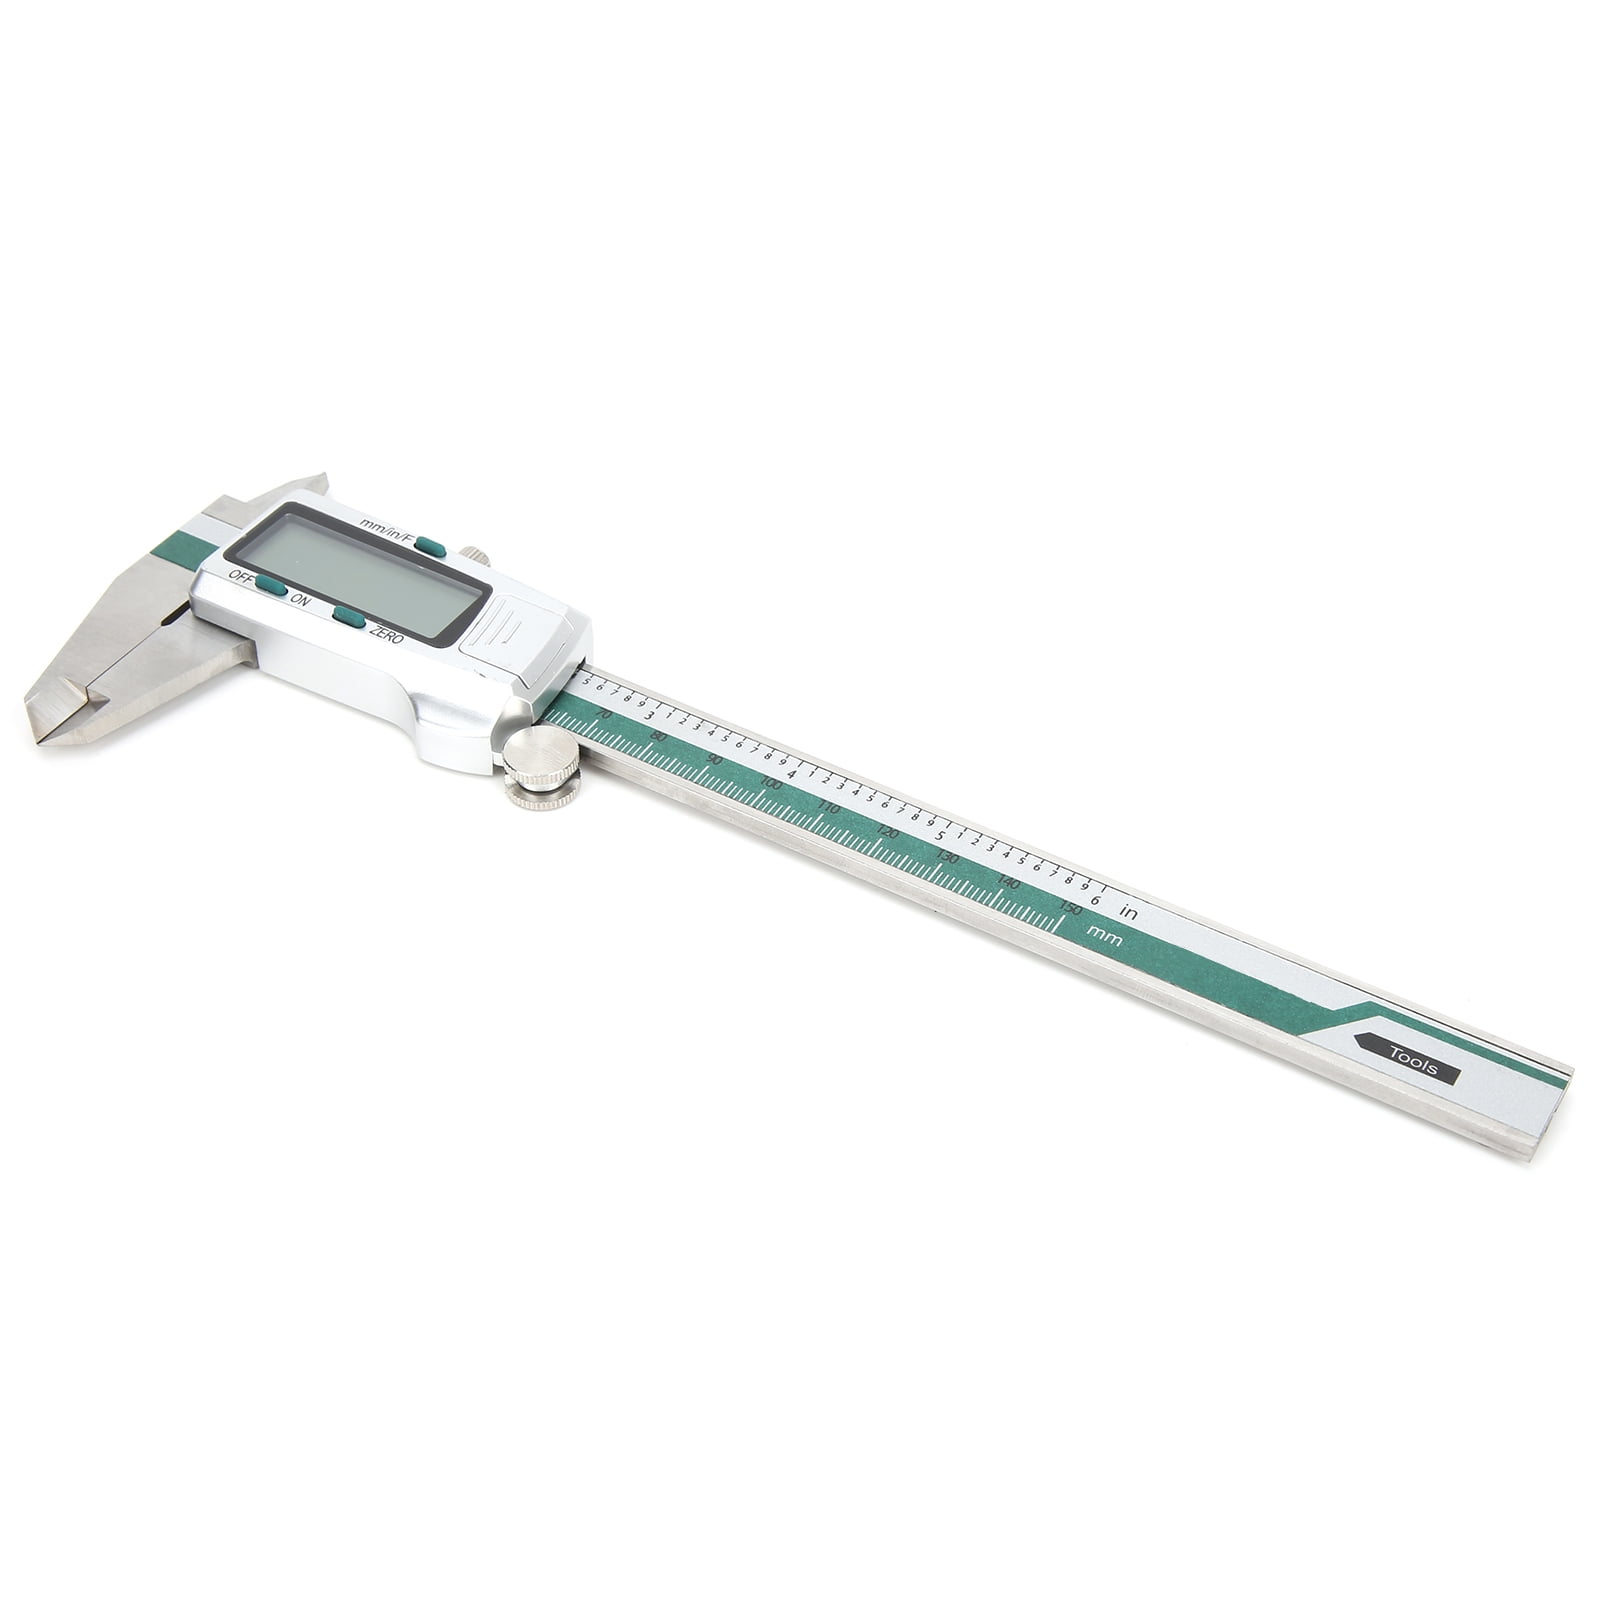 ET50 0.01mm Repeatability Vernier Caliper Measuring Instruments With LCD Display 